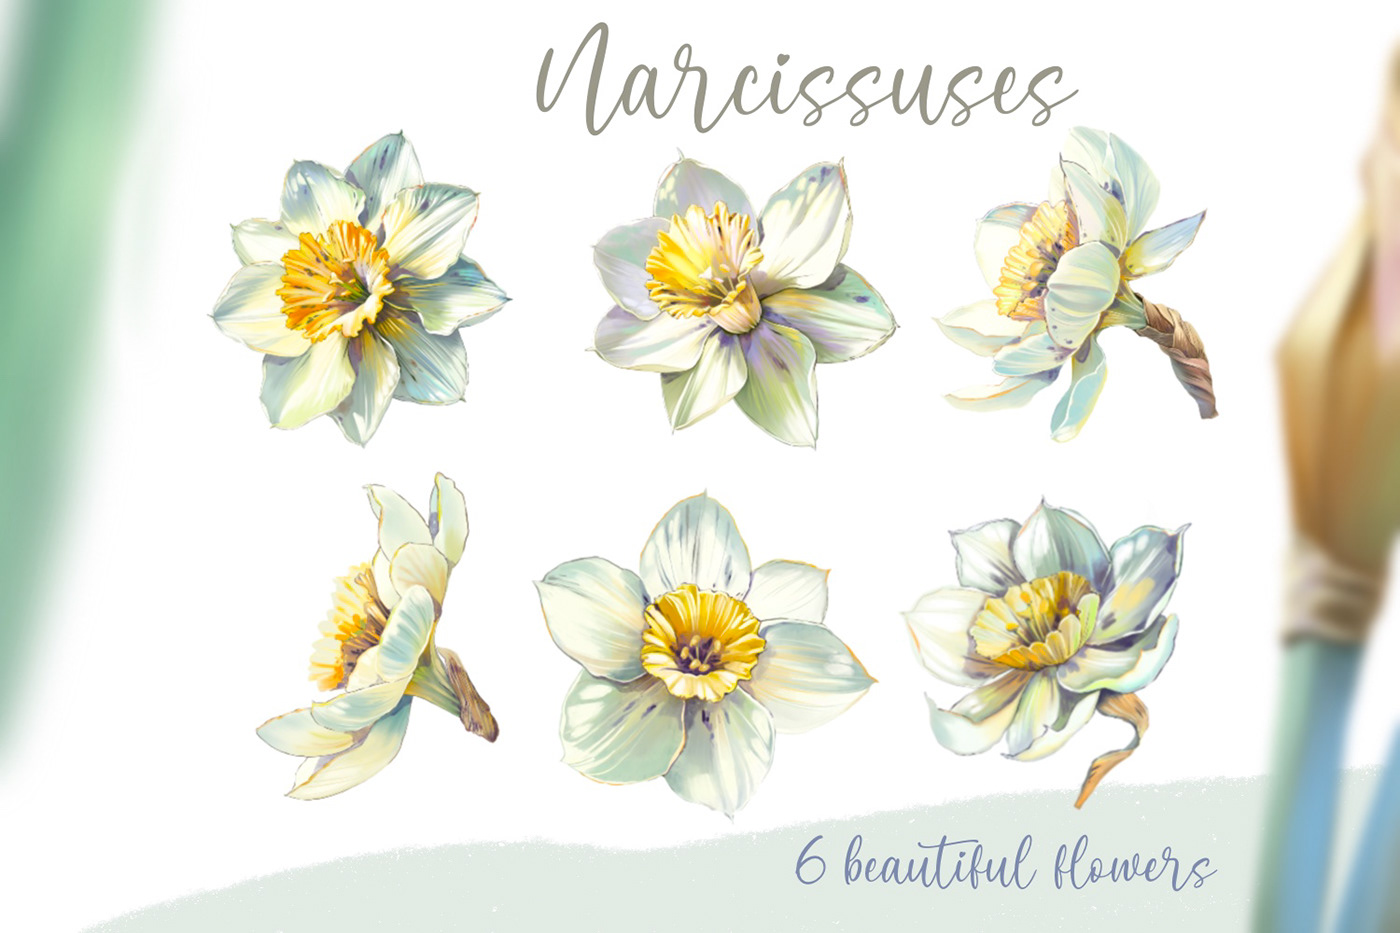 watercolor butterfly flower narcissus yellow White clip art ILLUSTRATION  Nature botanical art brush stroke Bouquet meadow sunlight spring fresh summer floral delicate hues daffodil paper ink blossom garden color blooms Stems petals canvas paint Jonquil